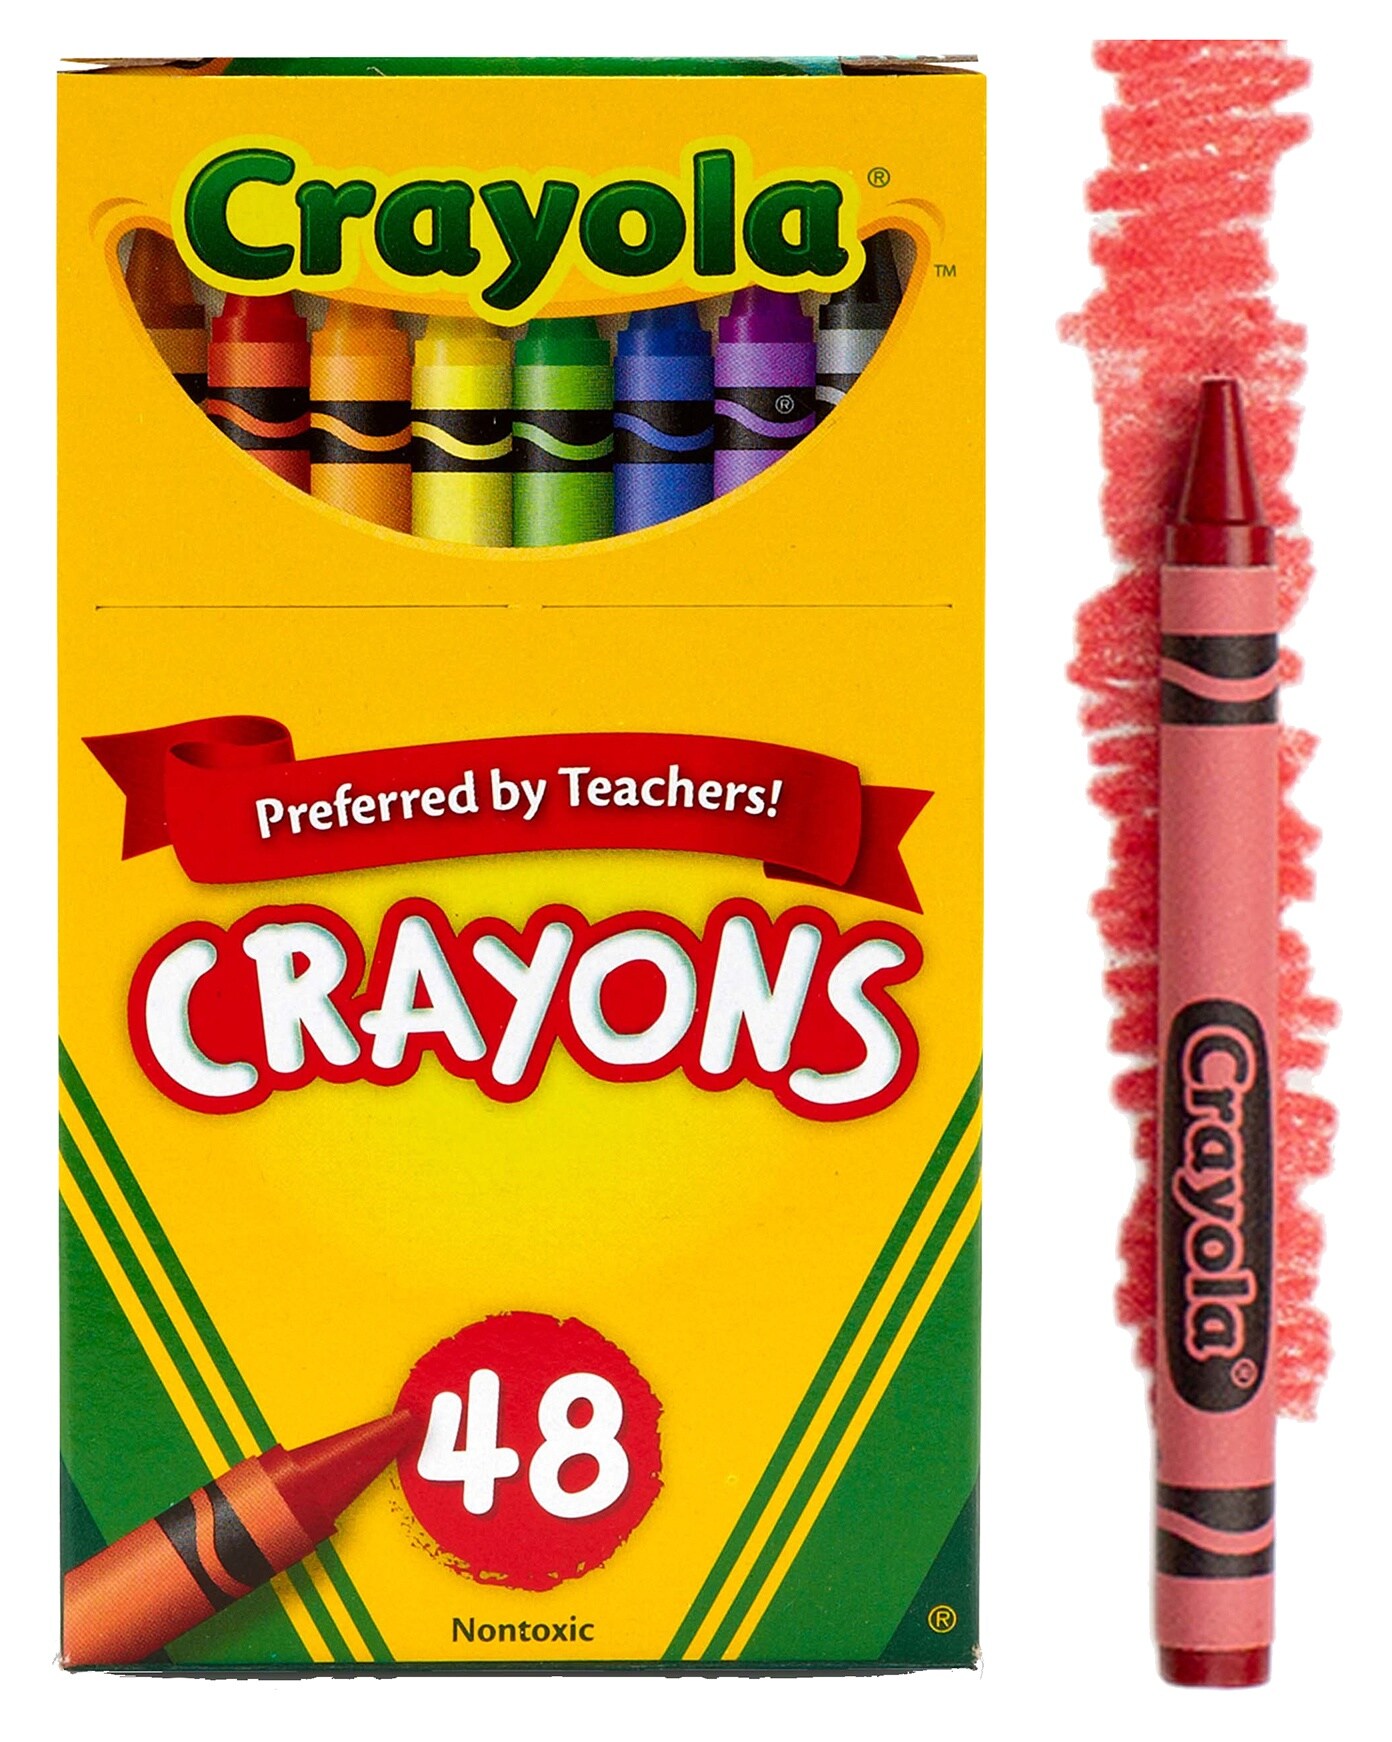 Crayons - 48 Assorted Colors, Boxed